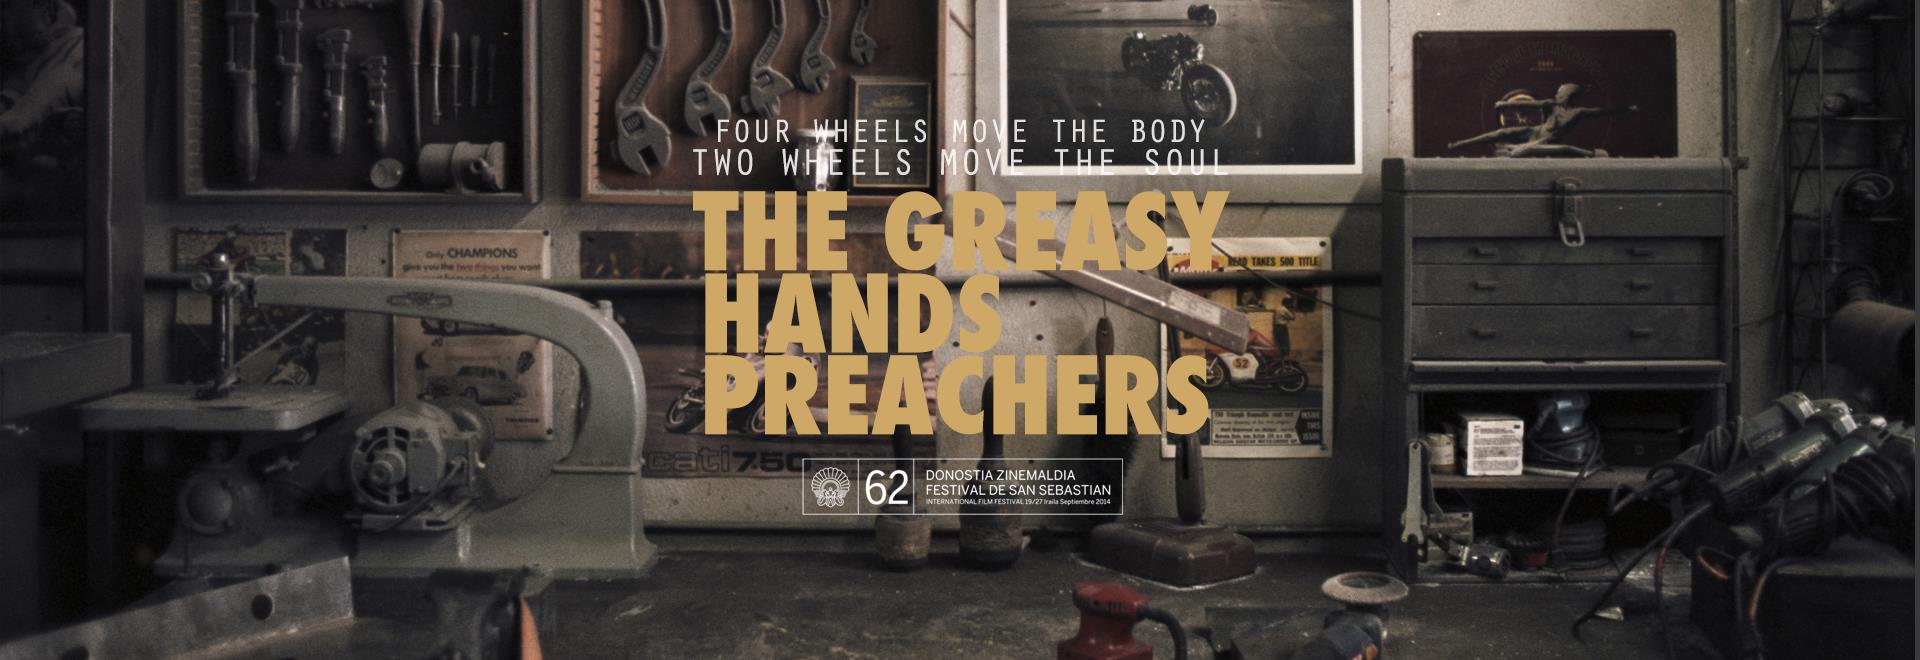 THE GREASY HANDS PREACHERS